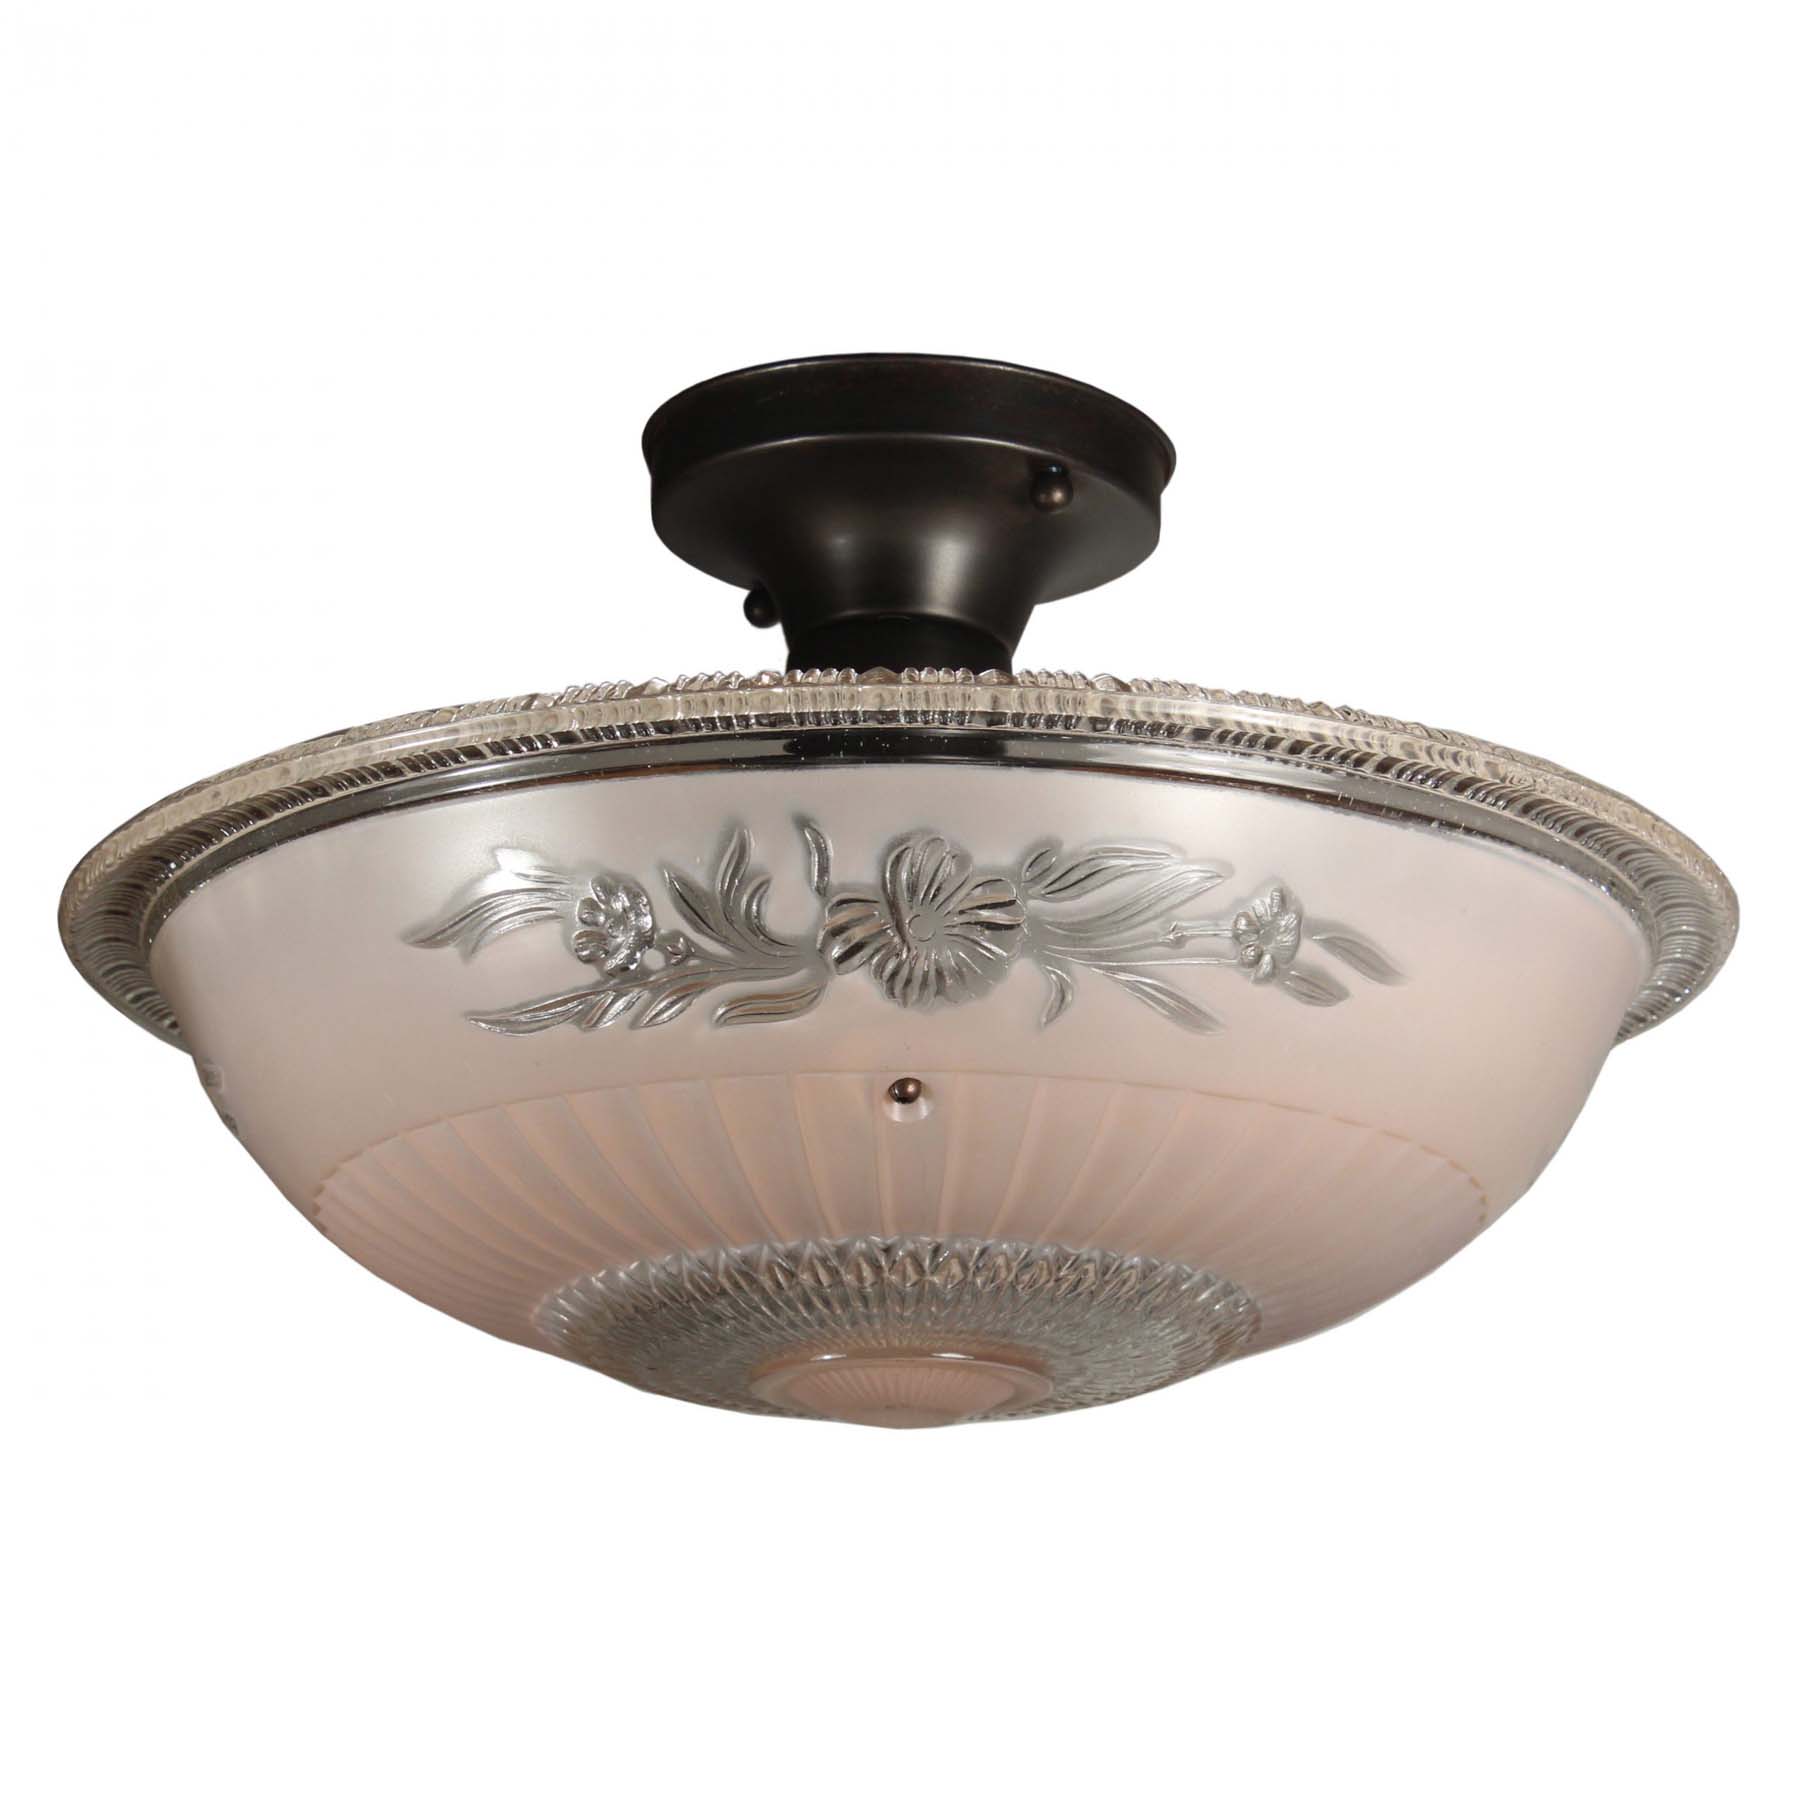 SOLD Vintage Flush Mount Light Fixture with Pale Pink Glass Shade, c.1940-67781